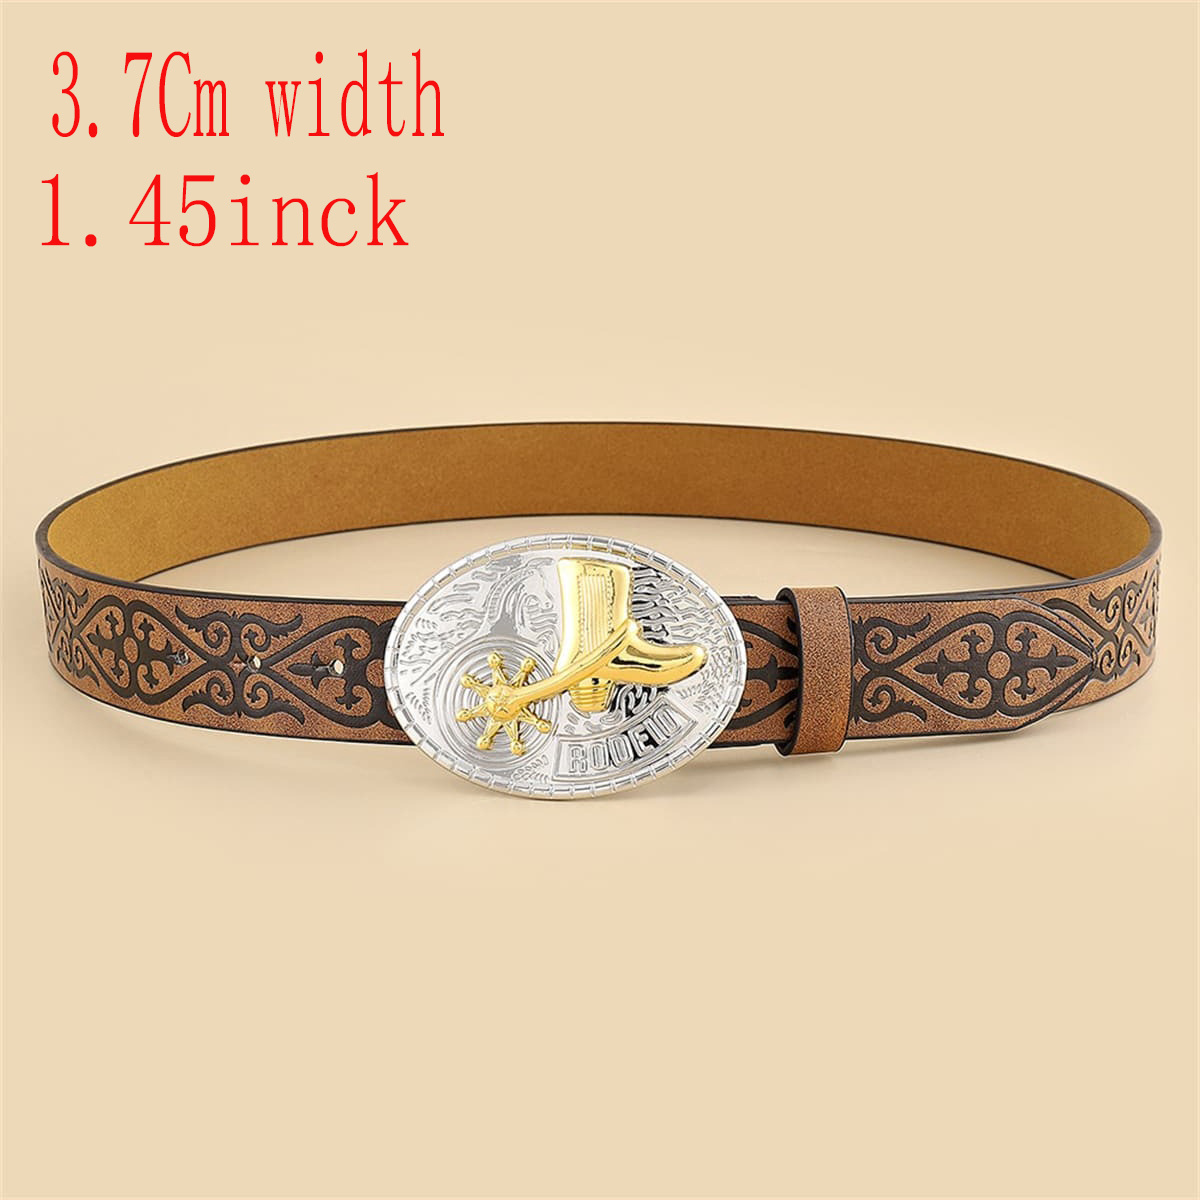 1pc 3.7cm Wide Brown Color Printed Belt Unisex Fashionable Vintage Casual  Belt With Buckle